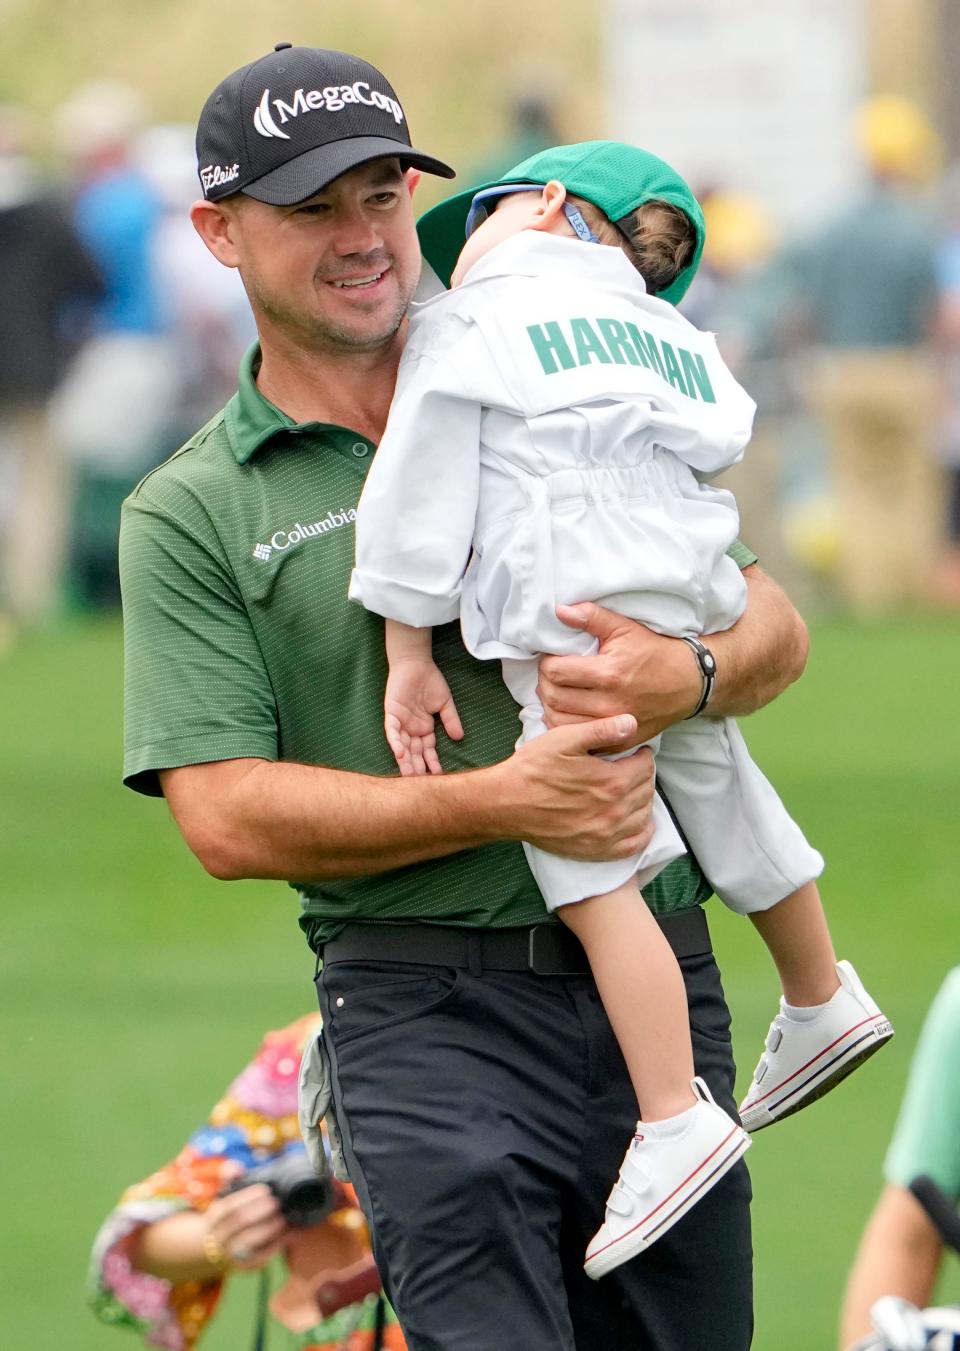 Brian Harman of St. Simons Island, Ga., carries his son Walter during the 2022 Par 3 Contest at Augusta National.